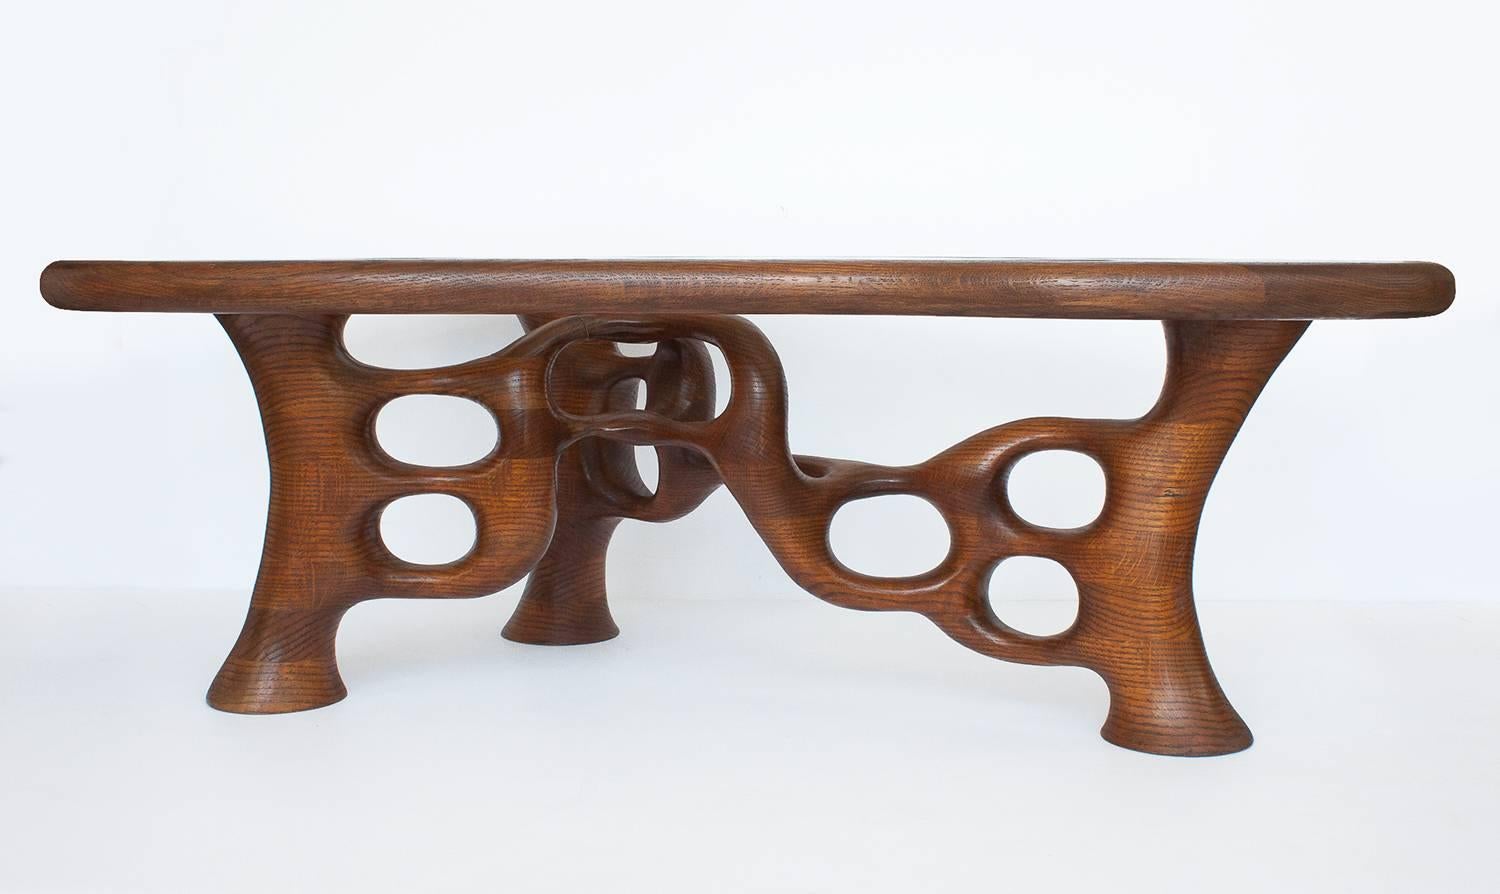 American studio Craft movement free-form coffee table by Craig Lauterbach. For several decades Lauterbach has been making creations, recognizable by their organic curvaceous forms and their fine balance between function and decorative presence. This